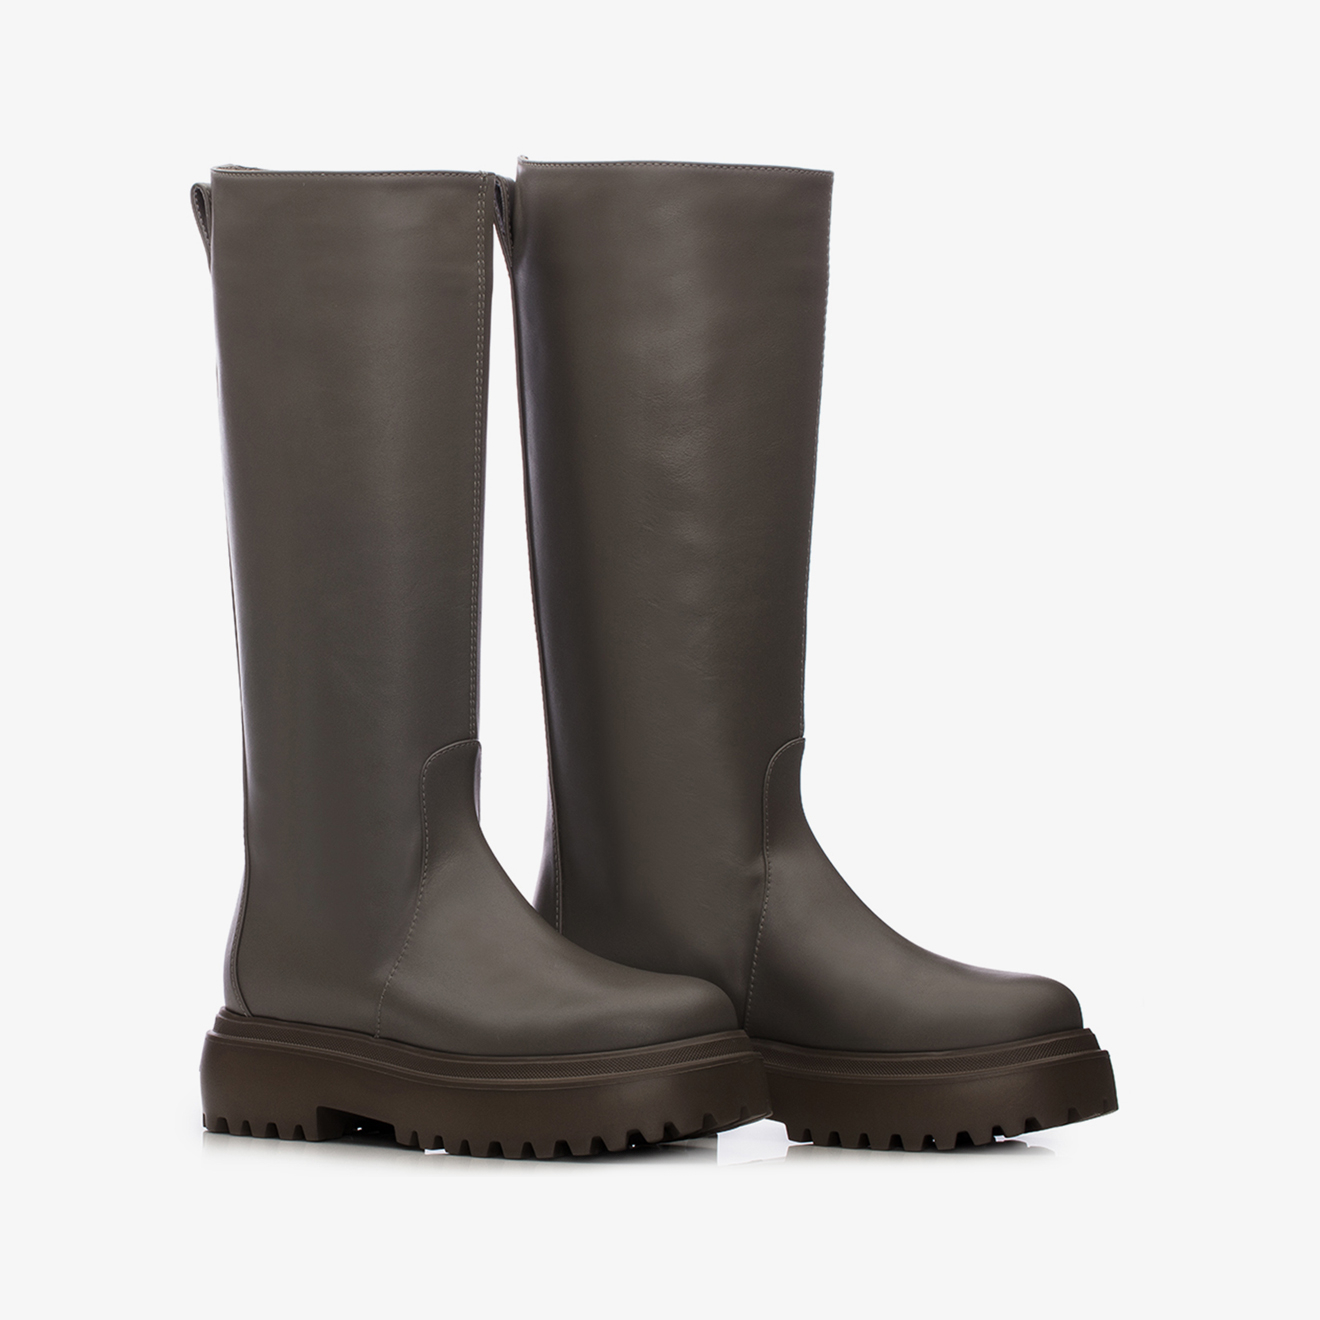 RANGER BOOT 50 mm - Le Silla official outlet